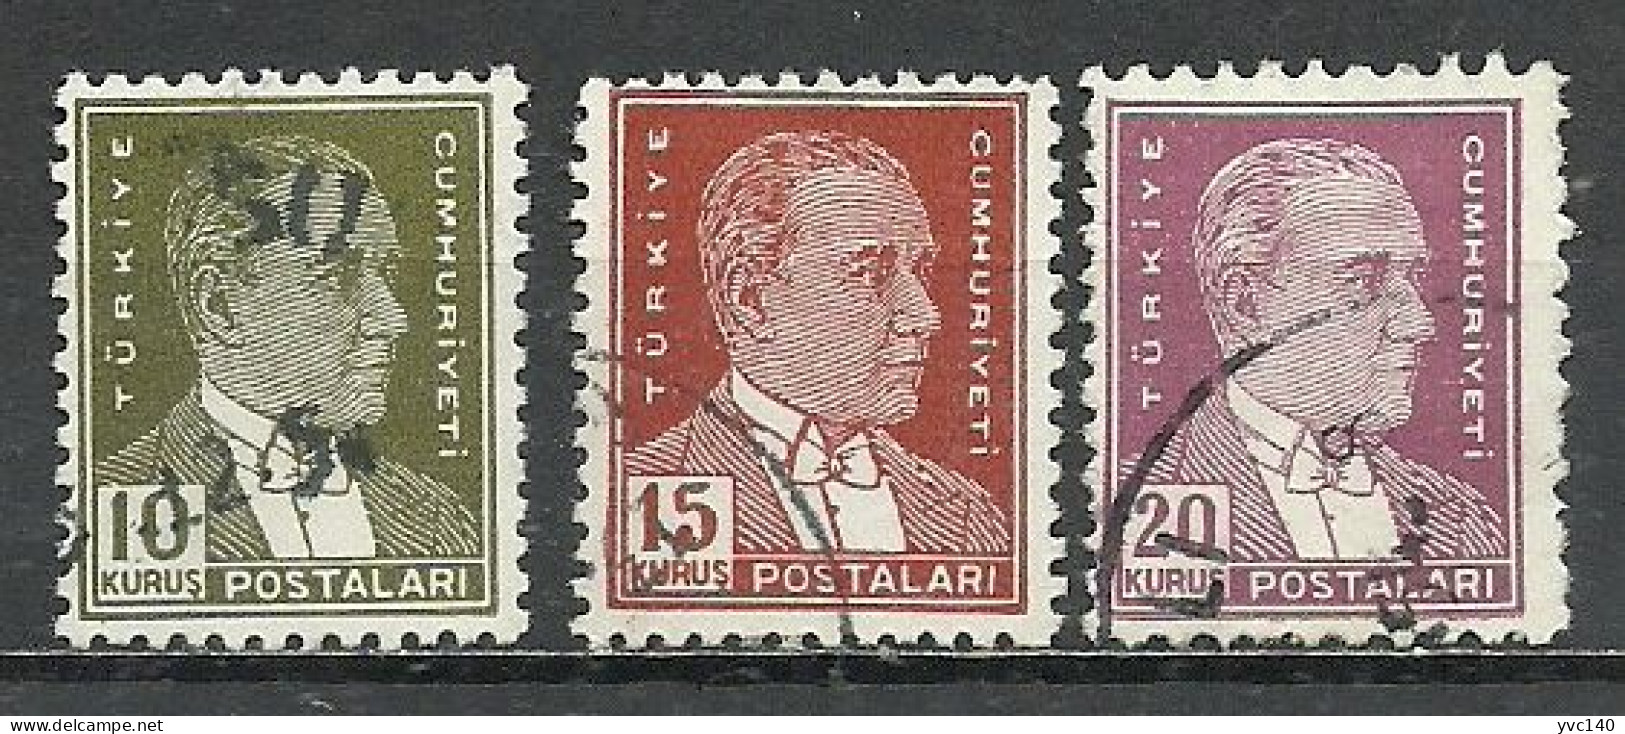 Turkey; 1953 8th Ataturk Issue Stamps - Used Stamps